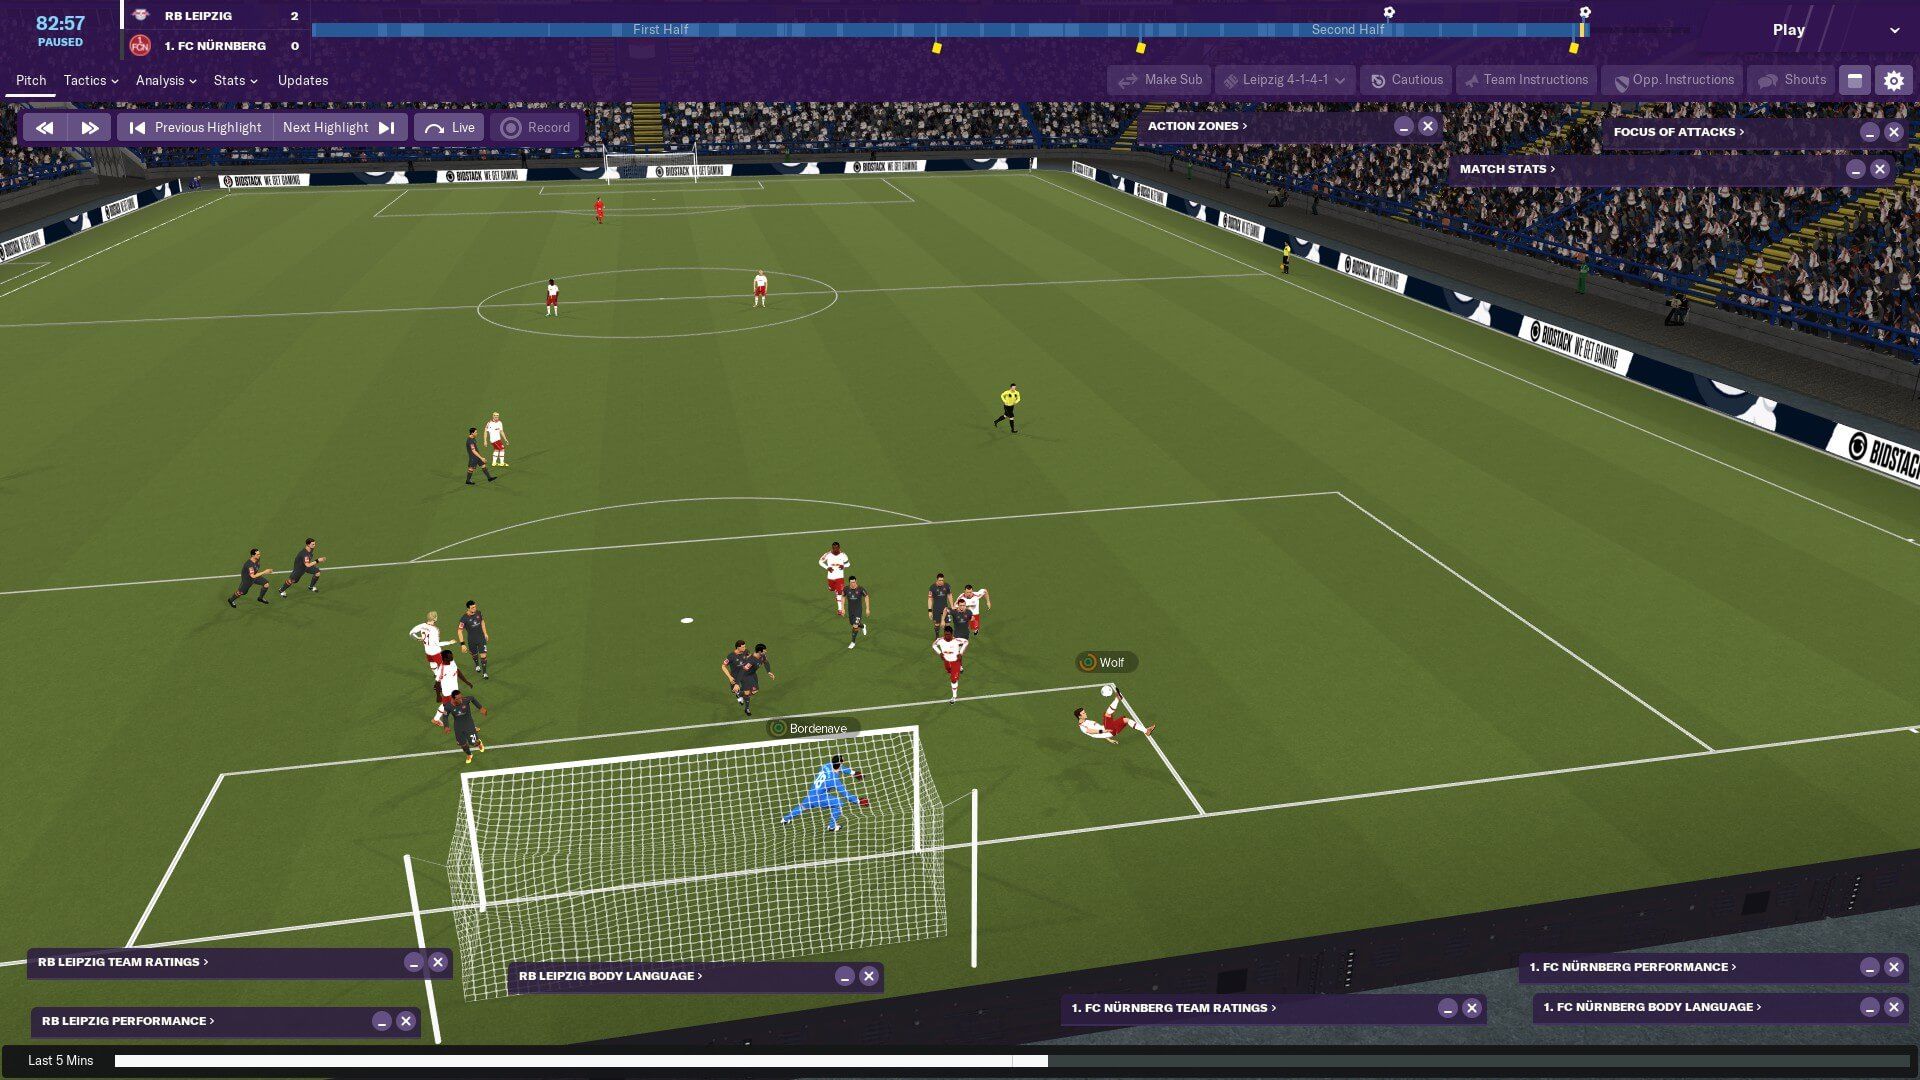 download football manager 2019 pc for free